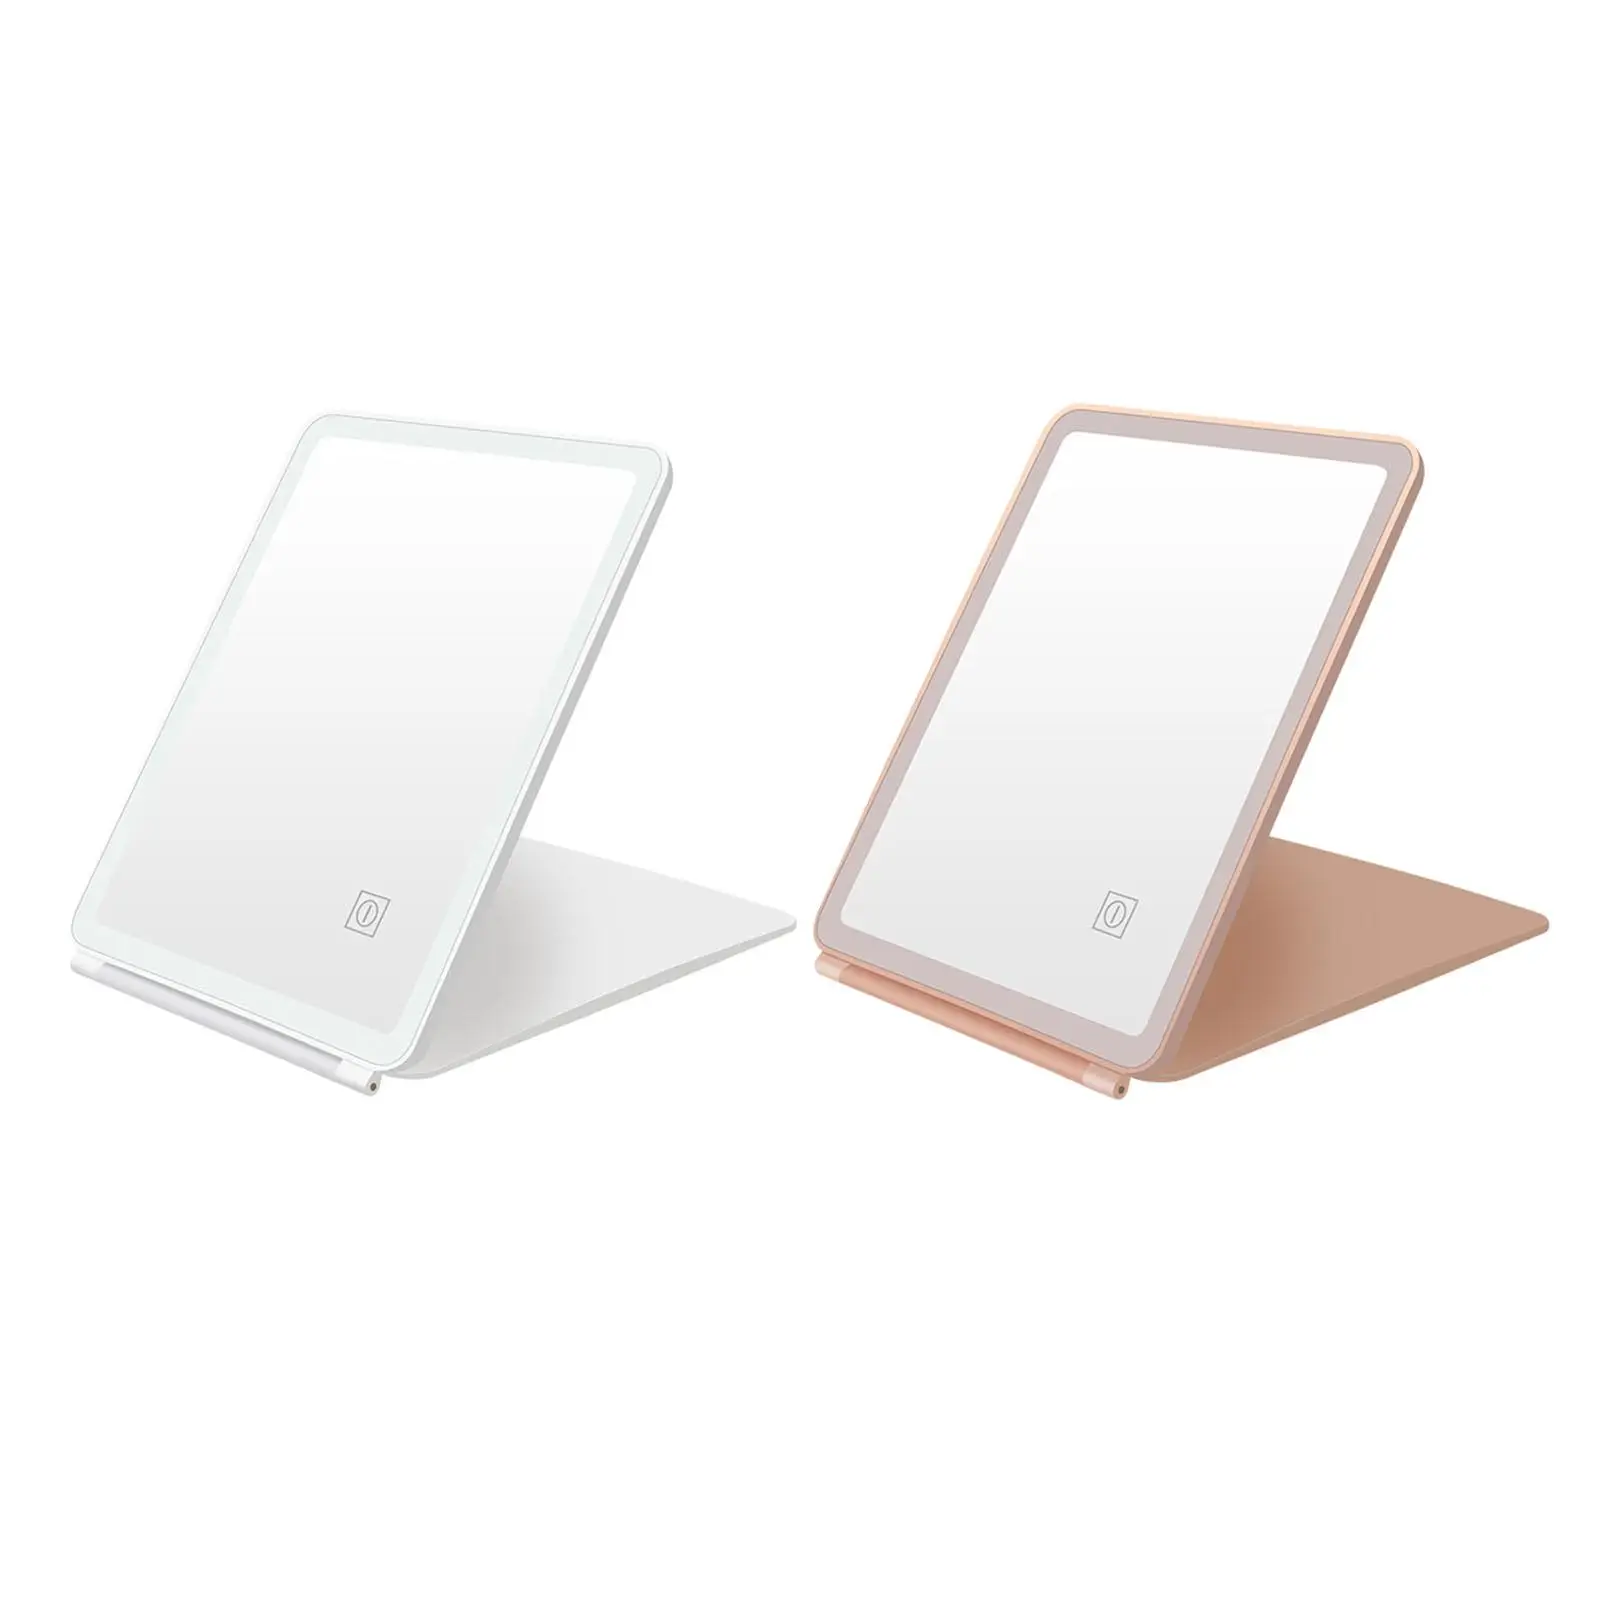 Folding LED Makeup Mirror Compact Cosmetic Lighted up Mirror for Countertop